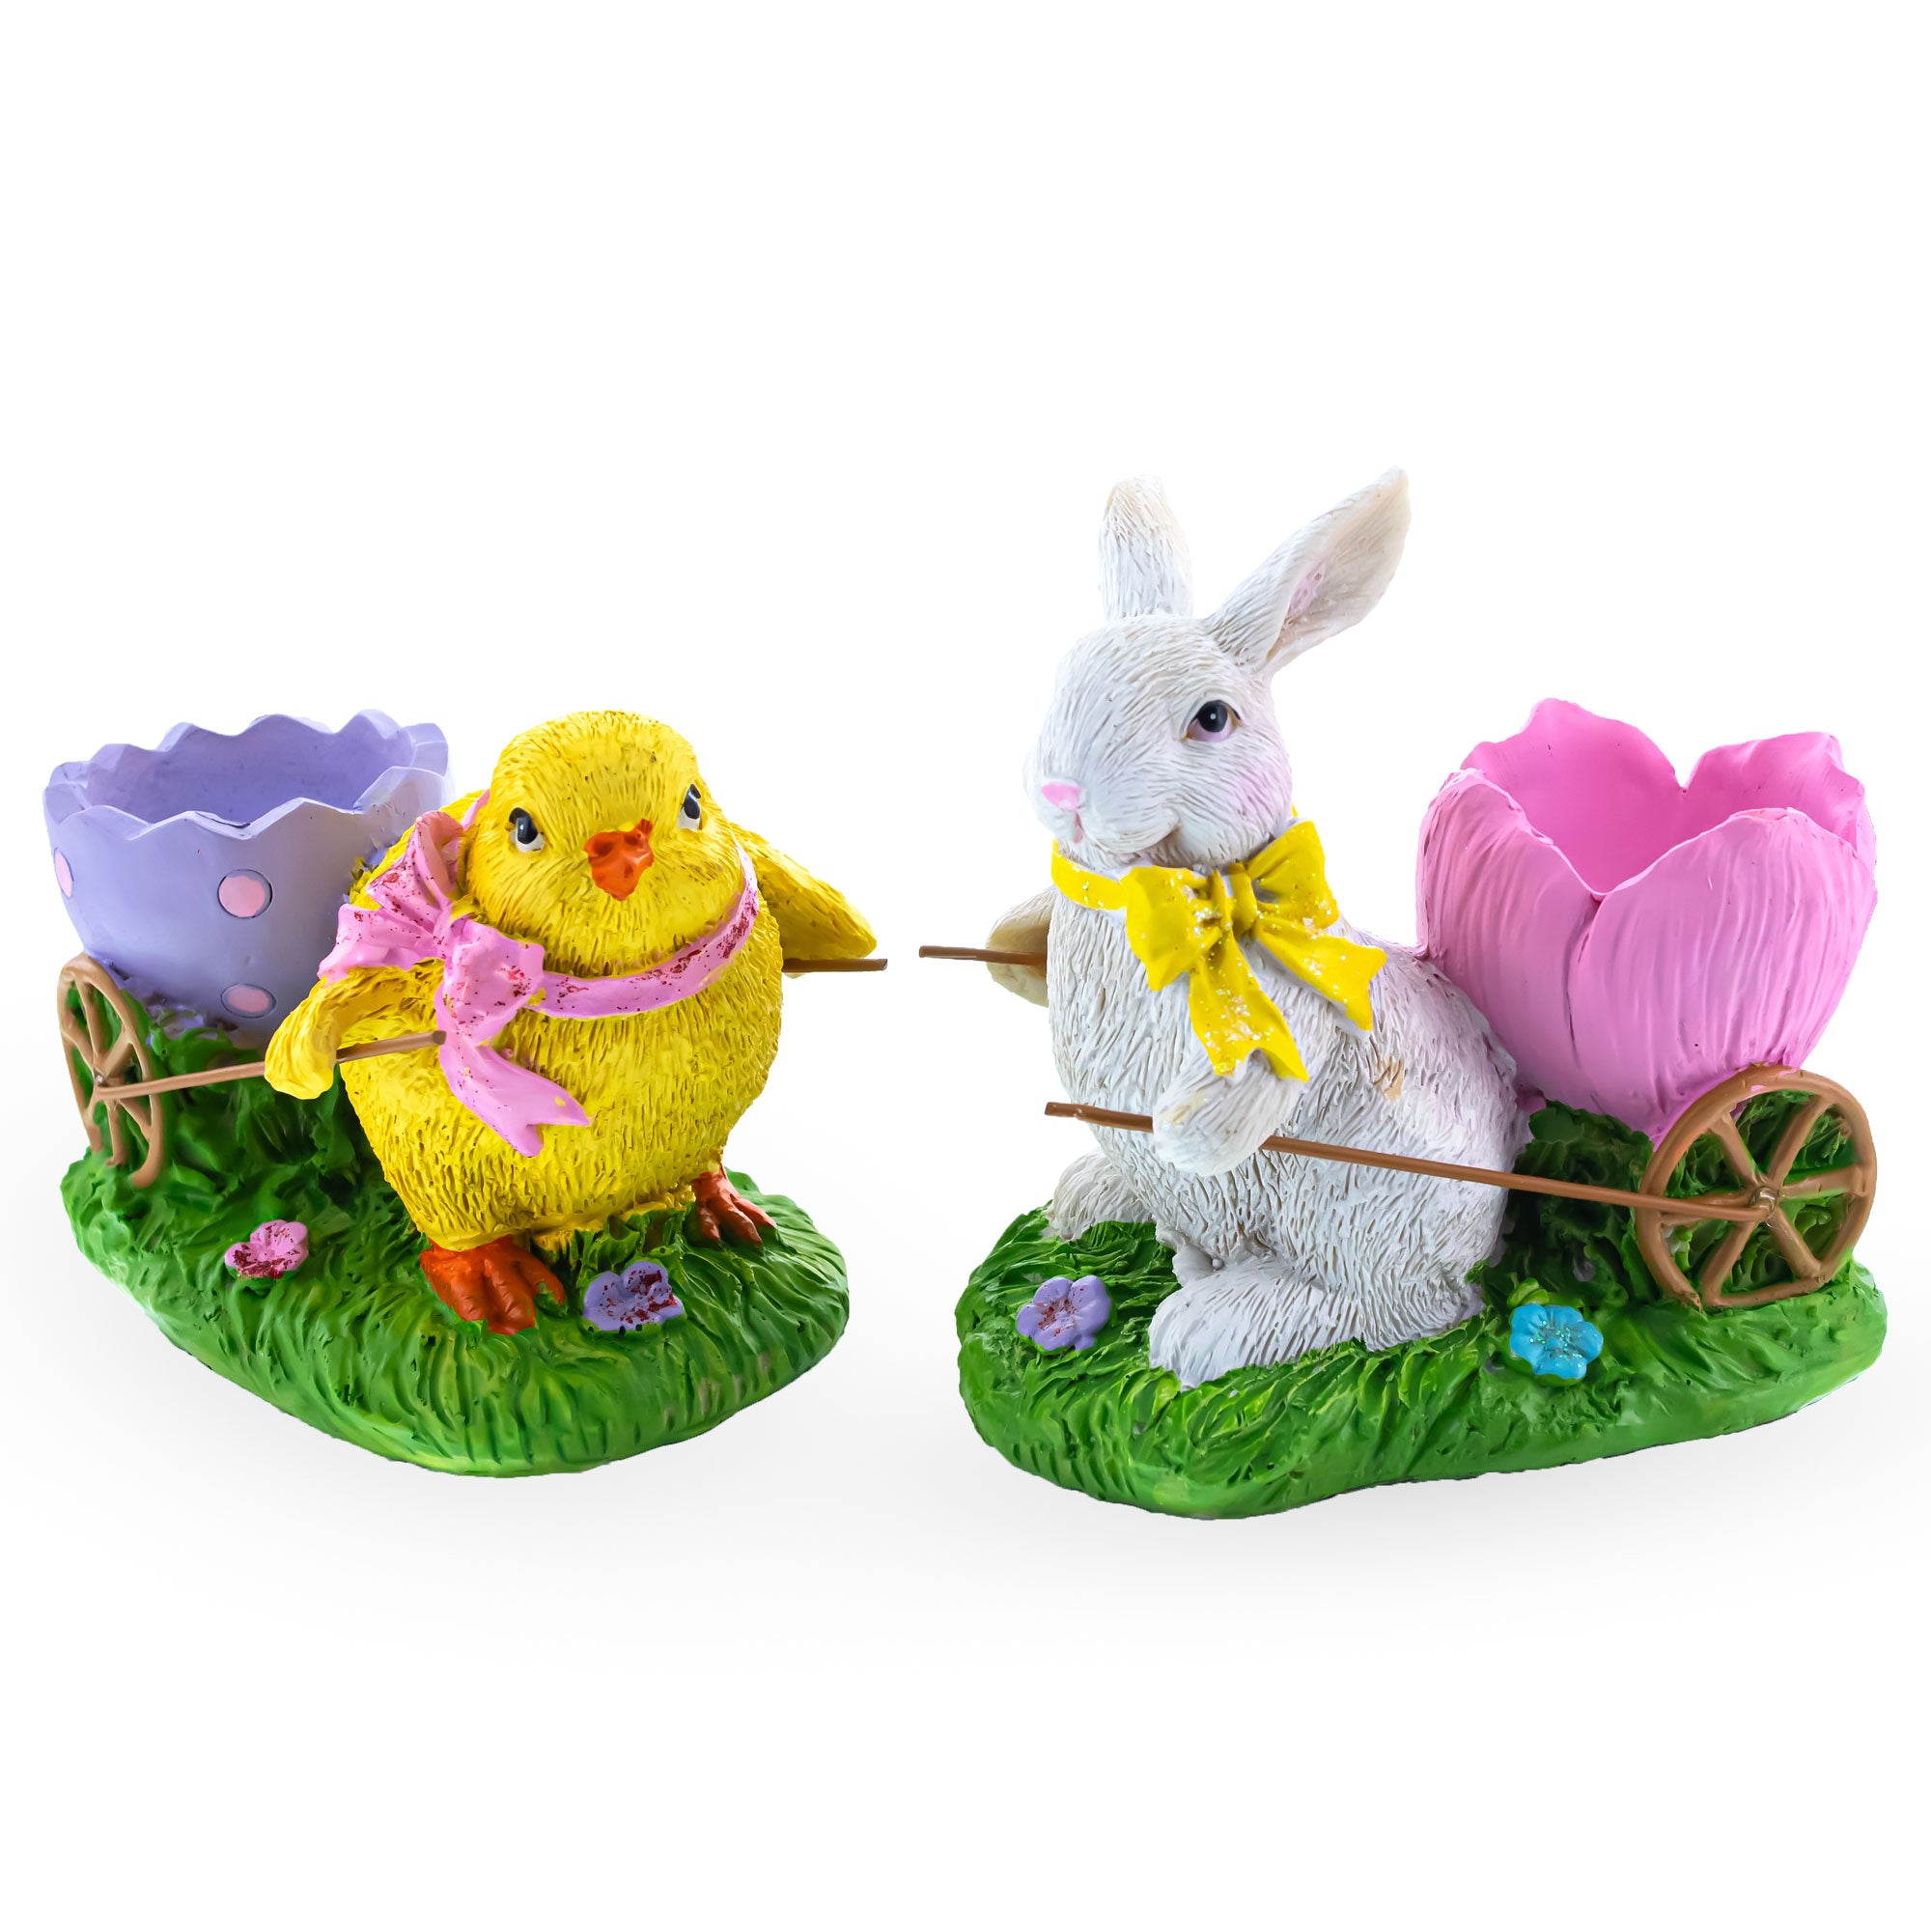 Buy Springtime Symphony Hand-Painted Egg Holder Figurines 5 Inches